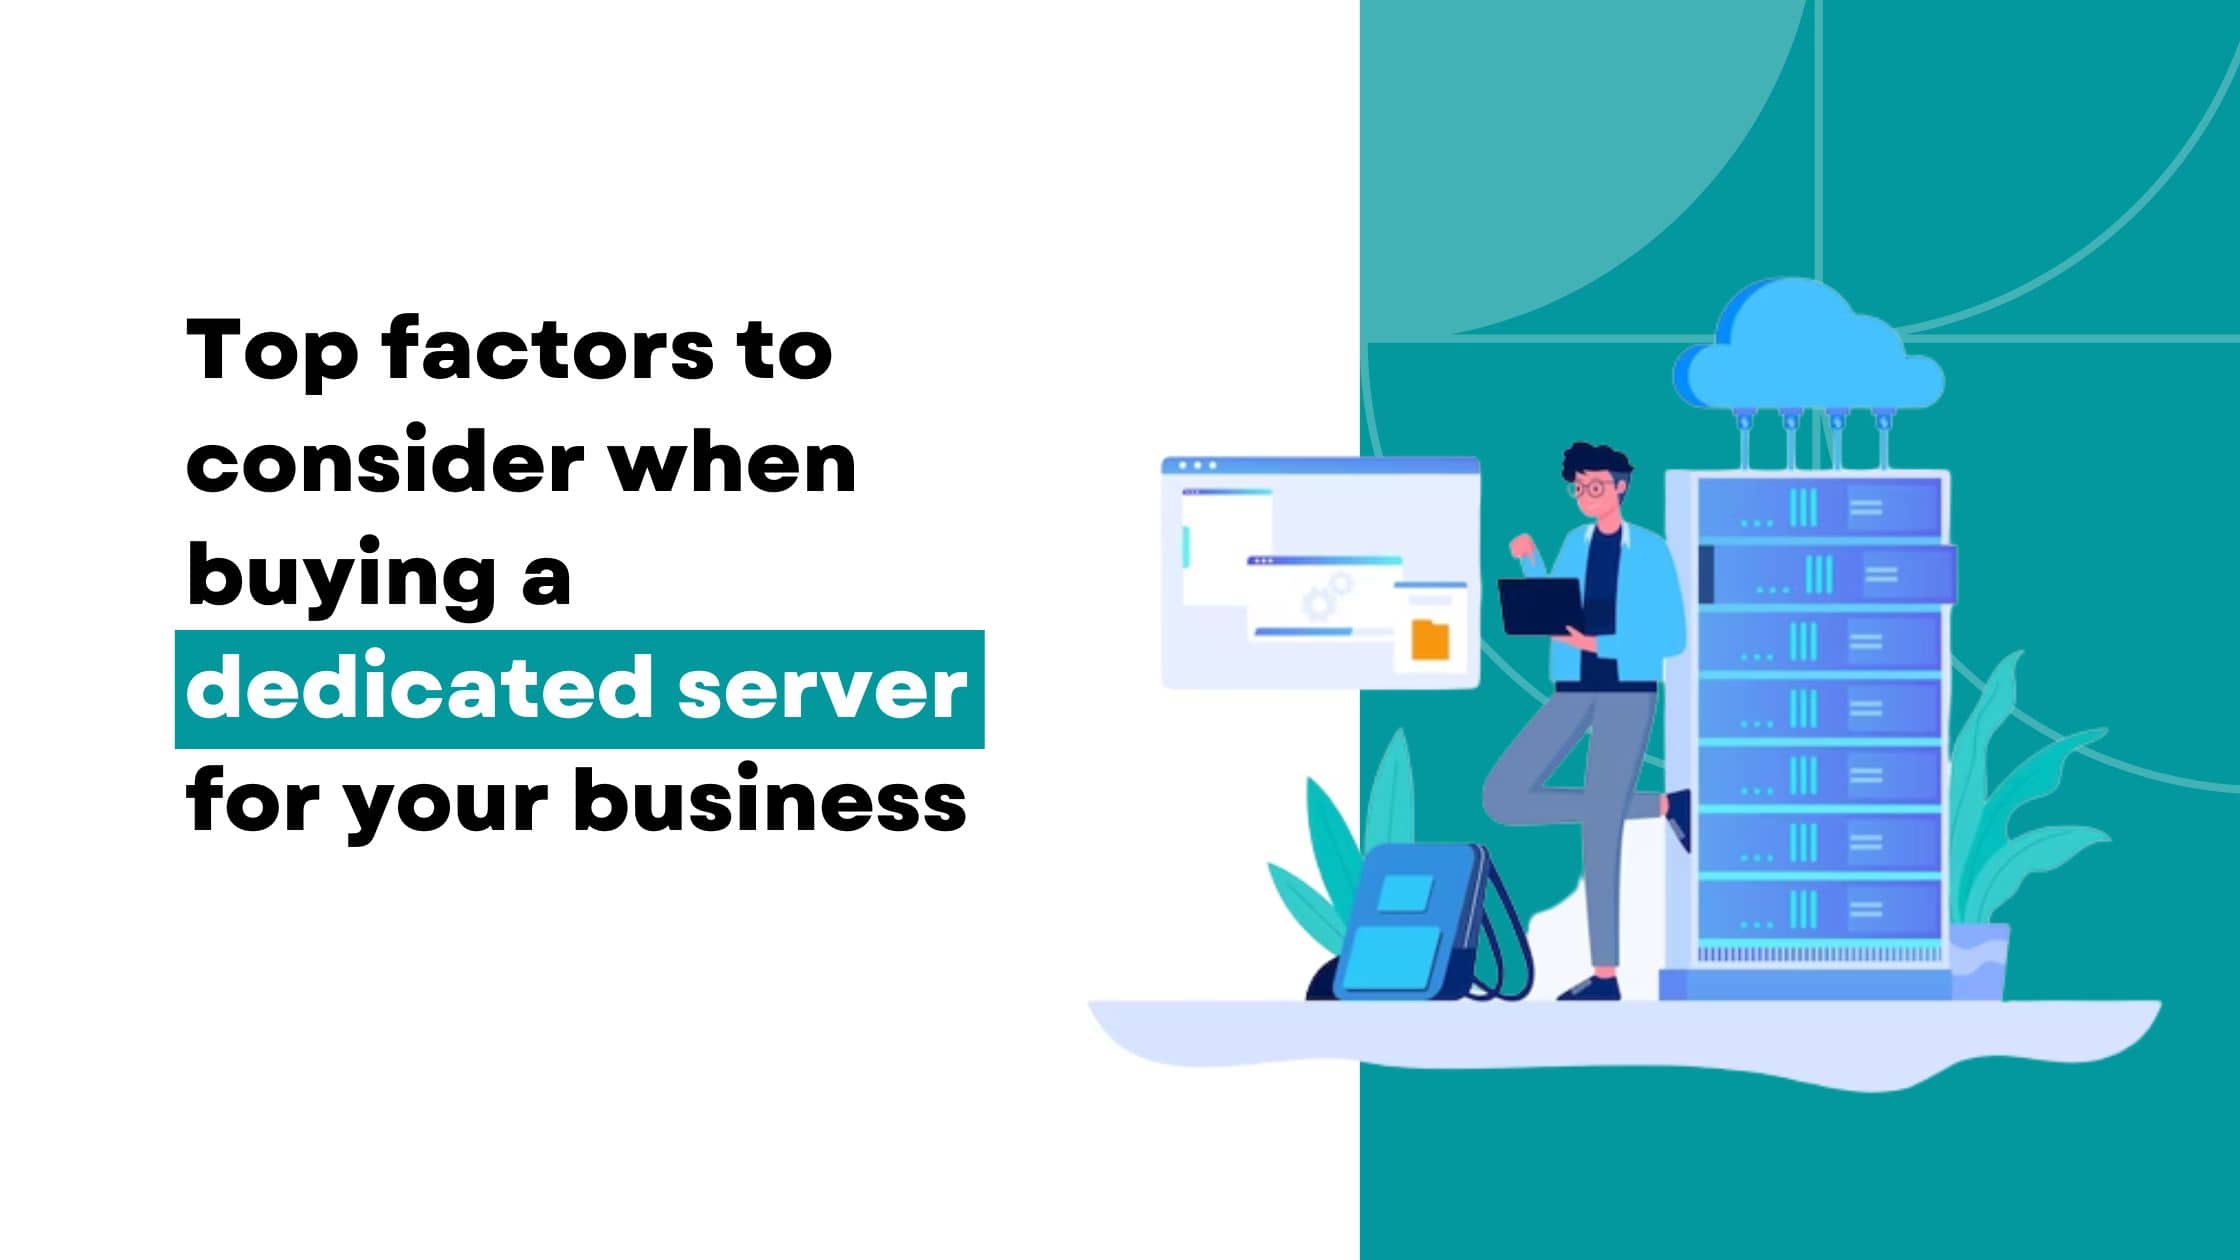 Top factors to consider when buying a dedicated server for your business